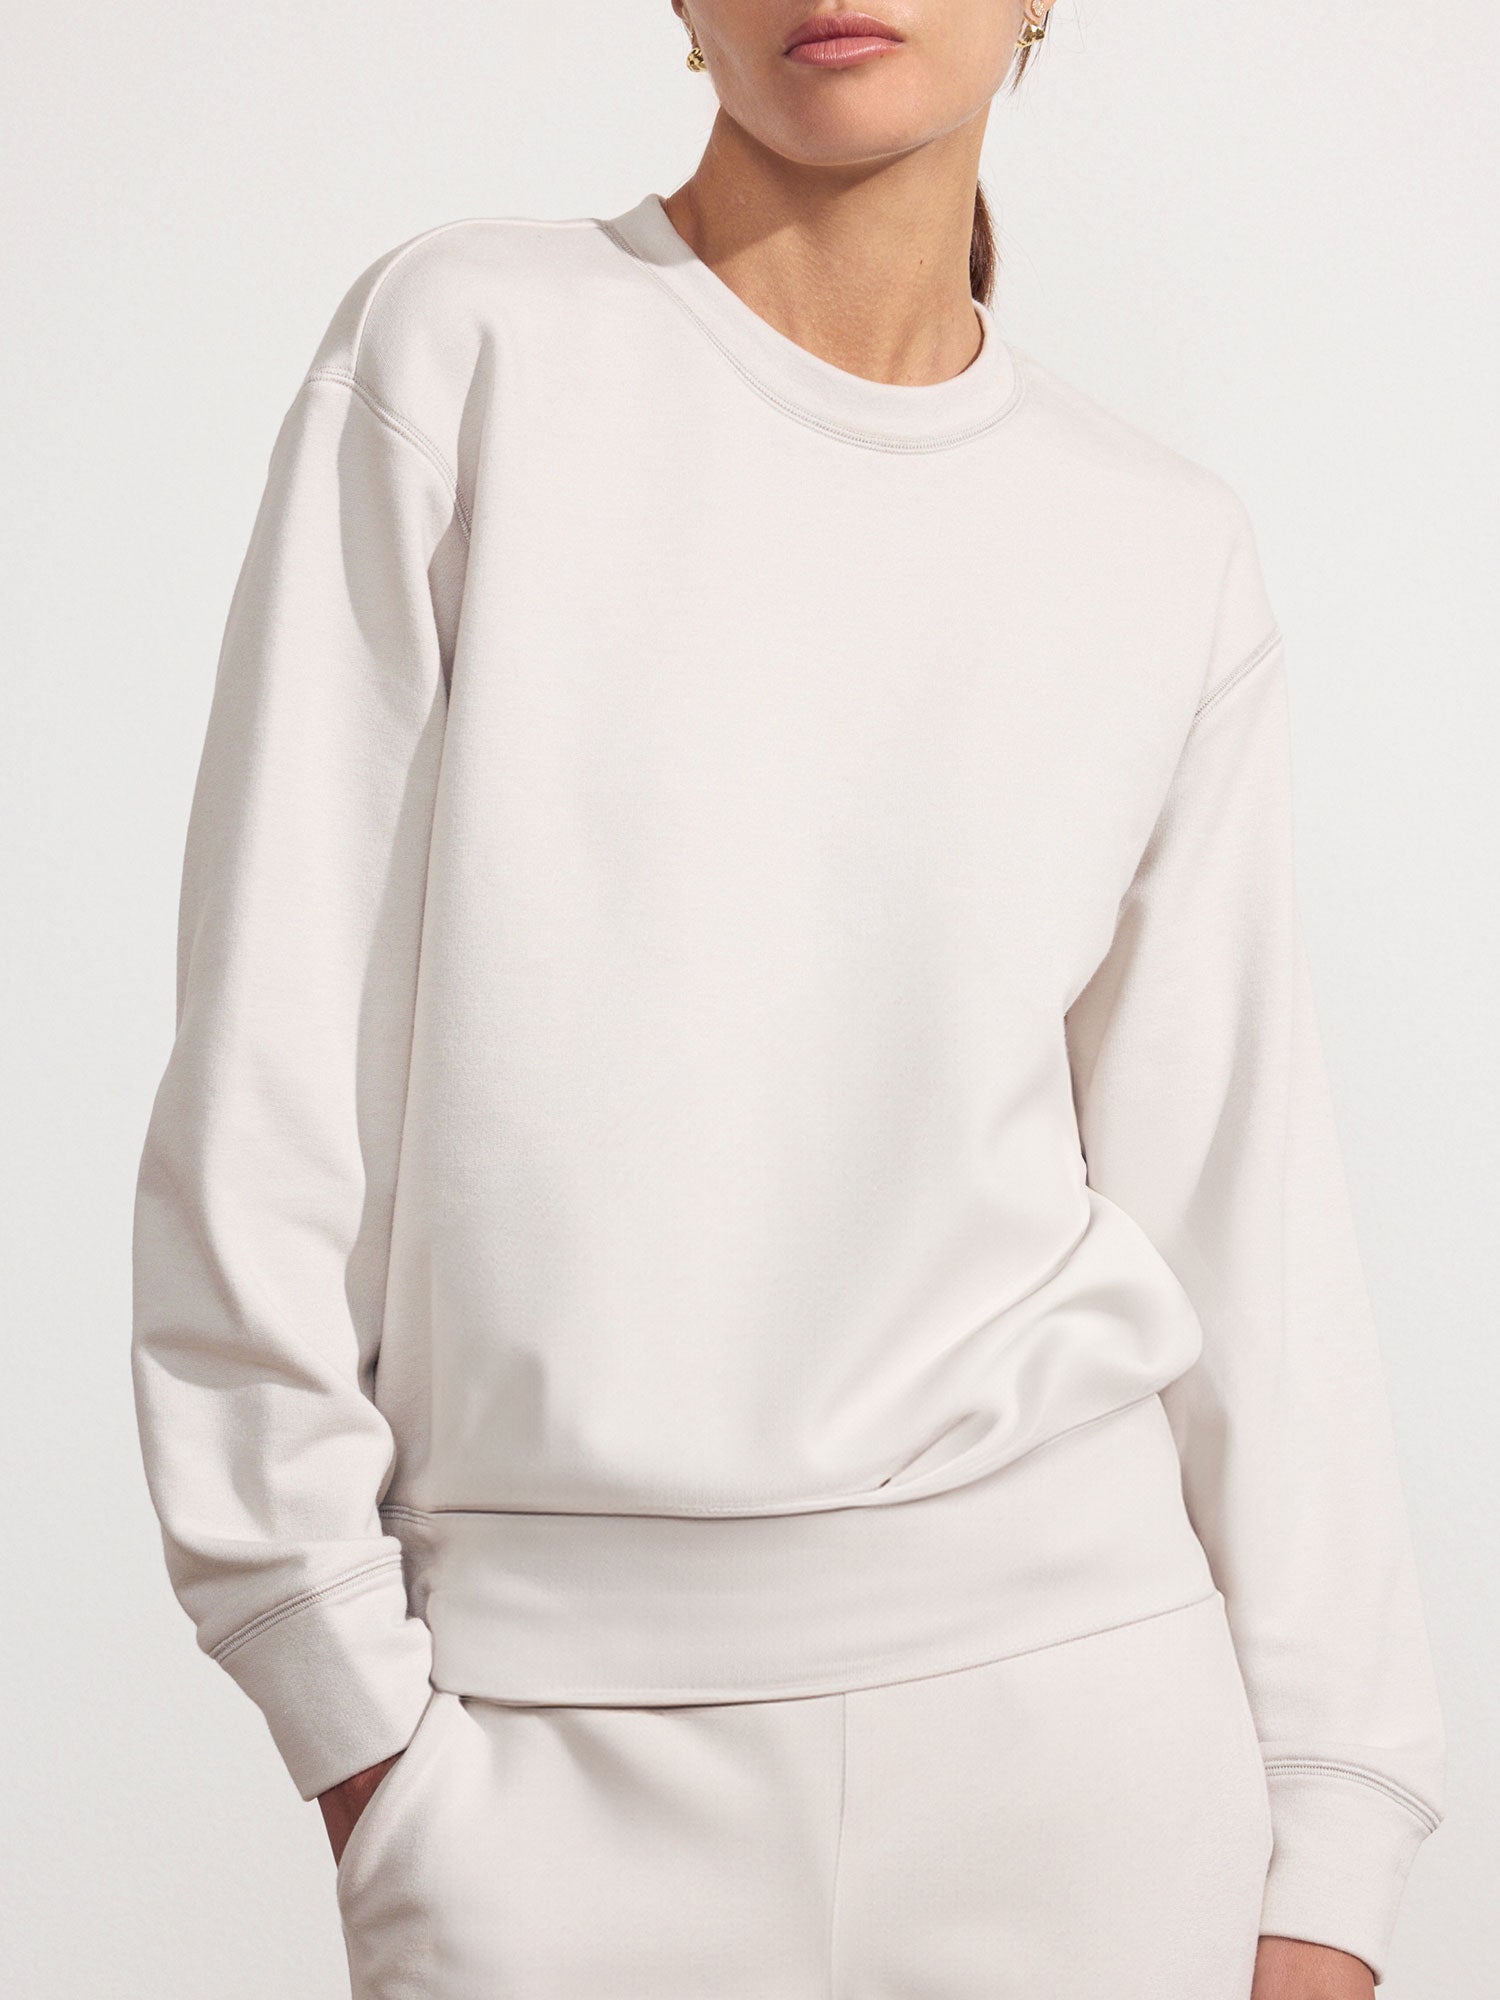 Mallo French Terry off-white pullover sweatshirt front view